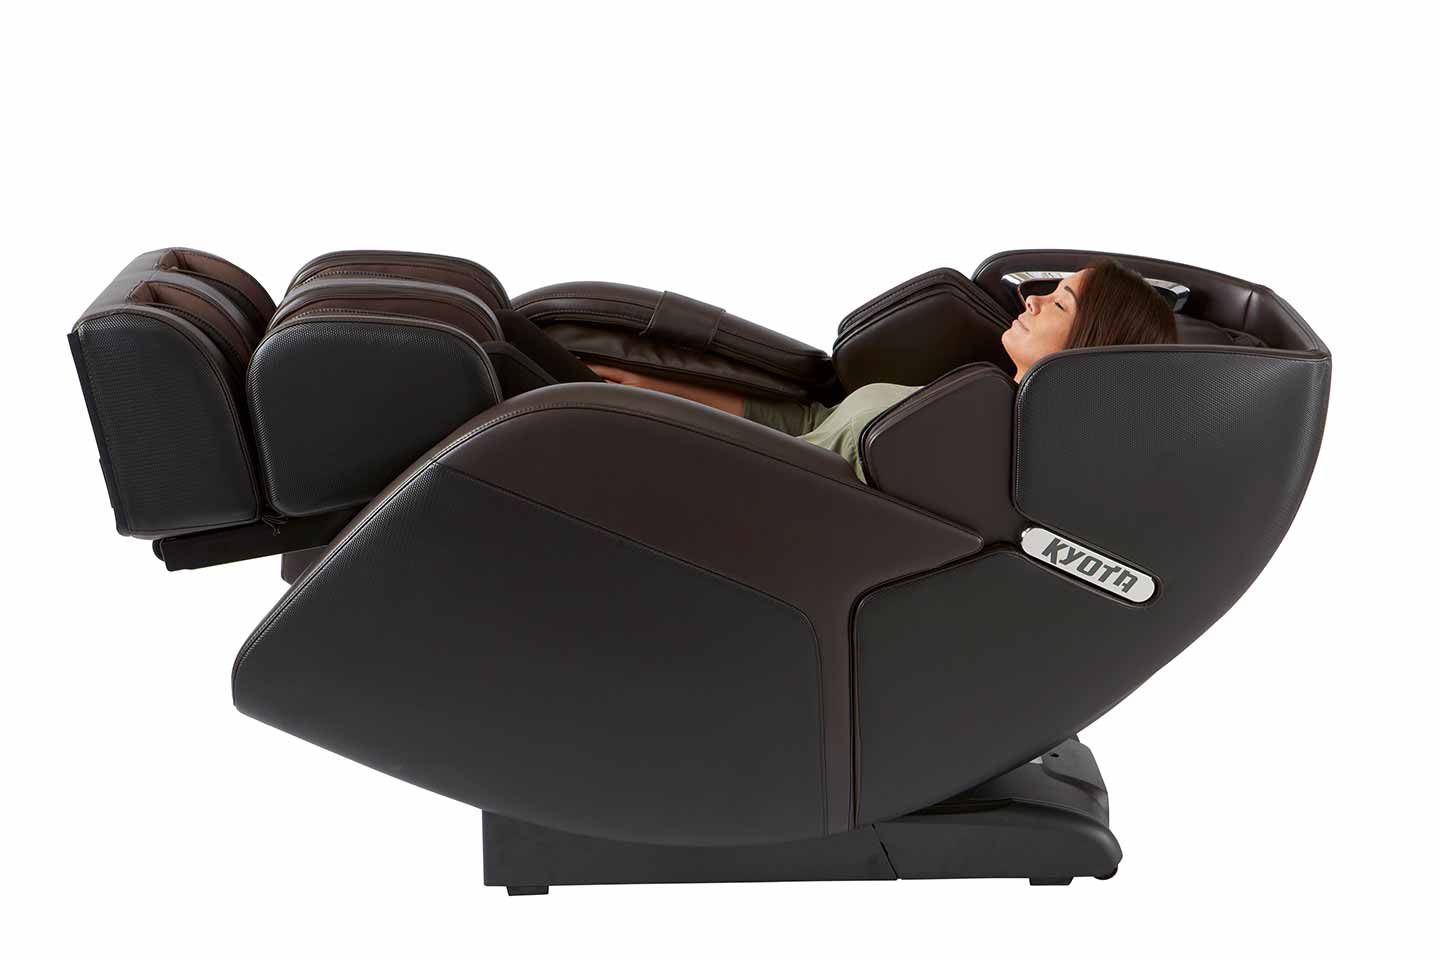 Electric massage recliner chair